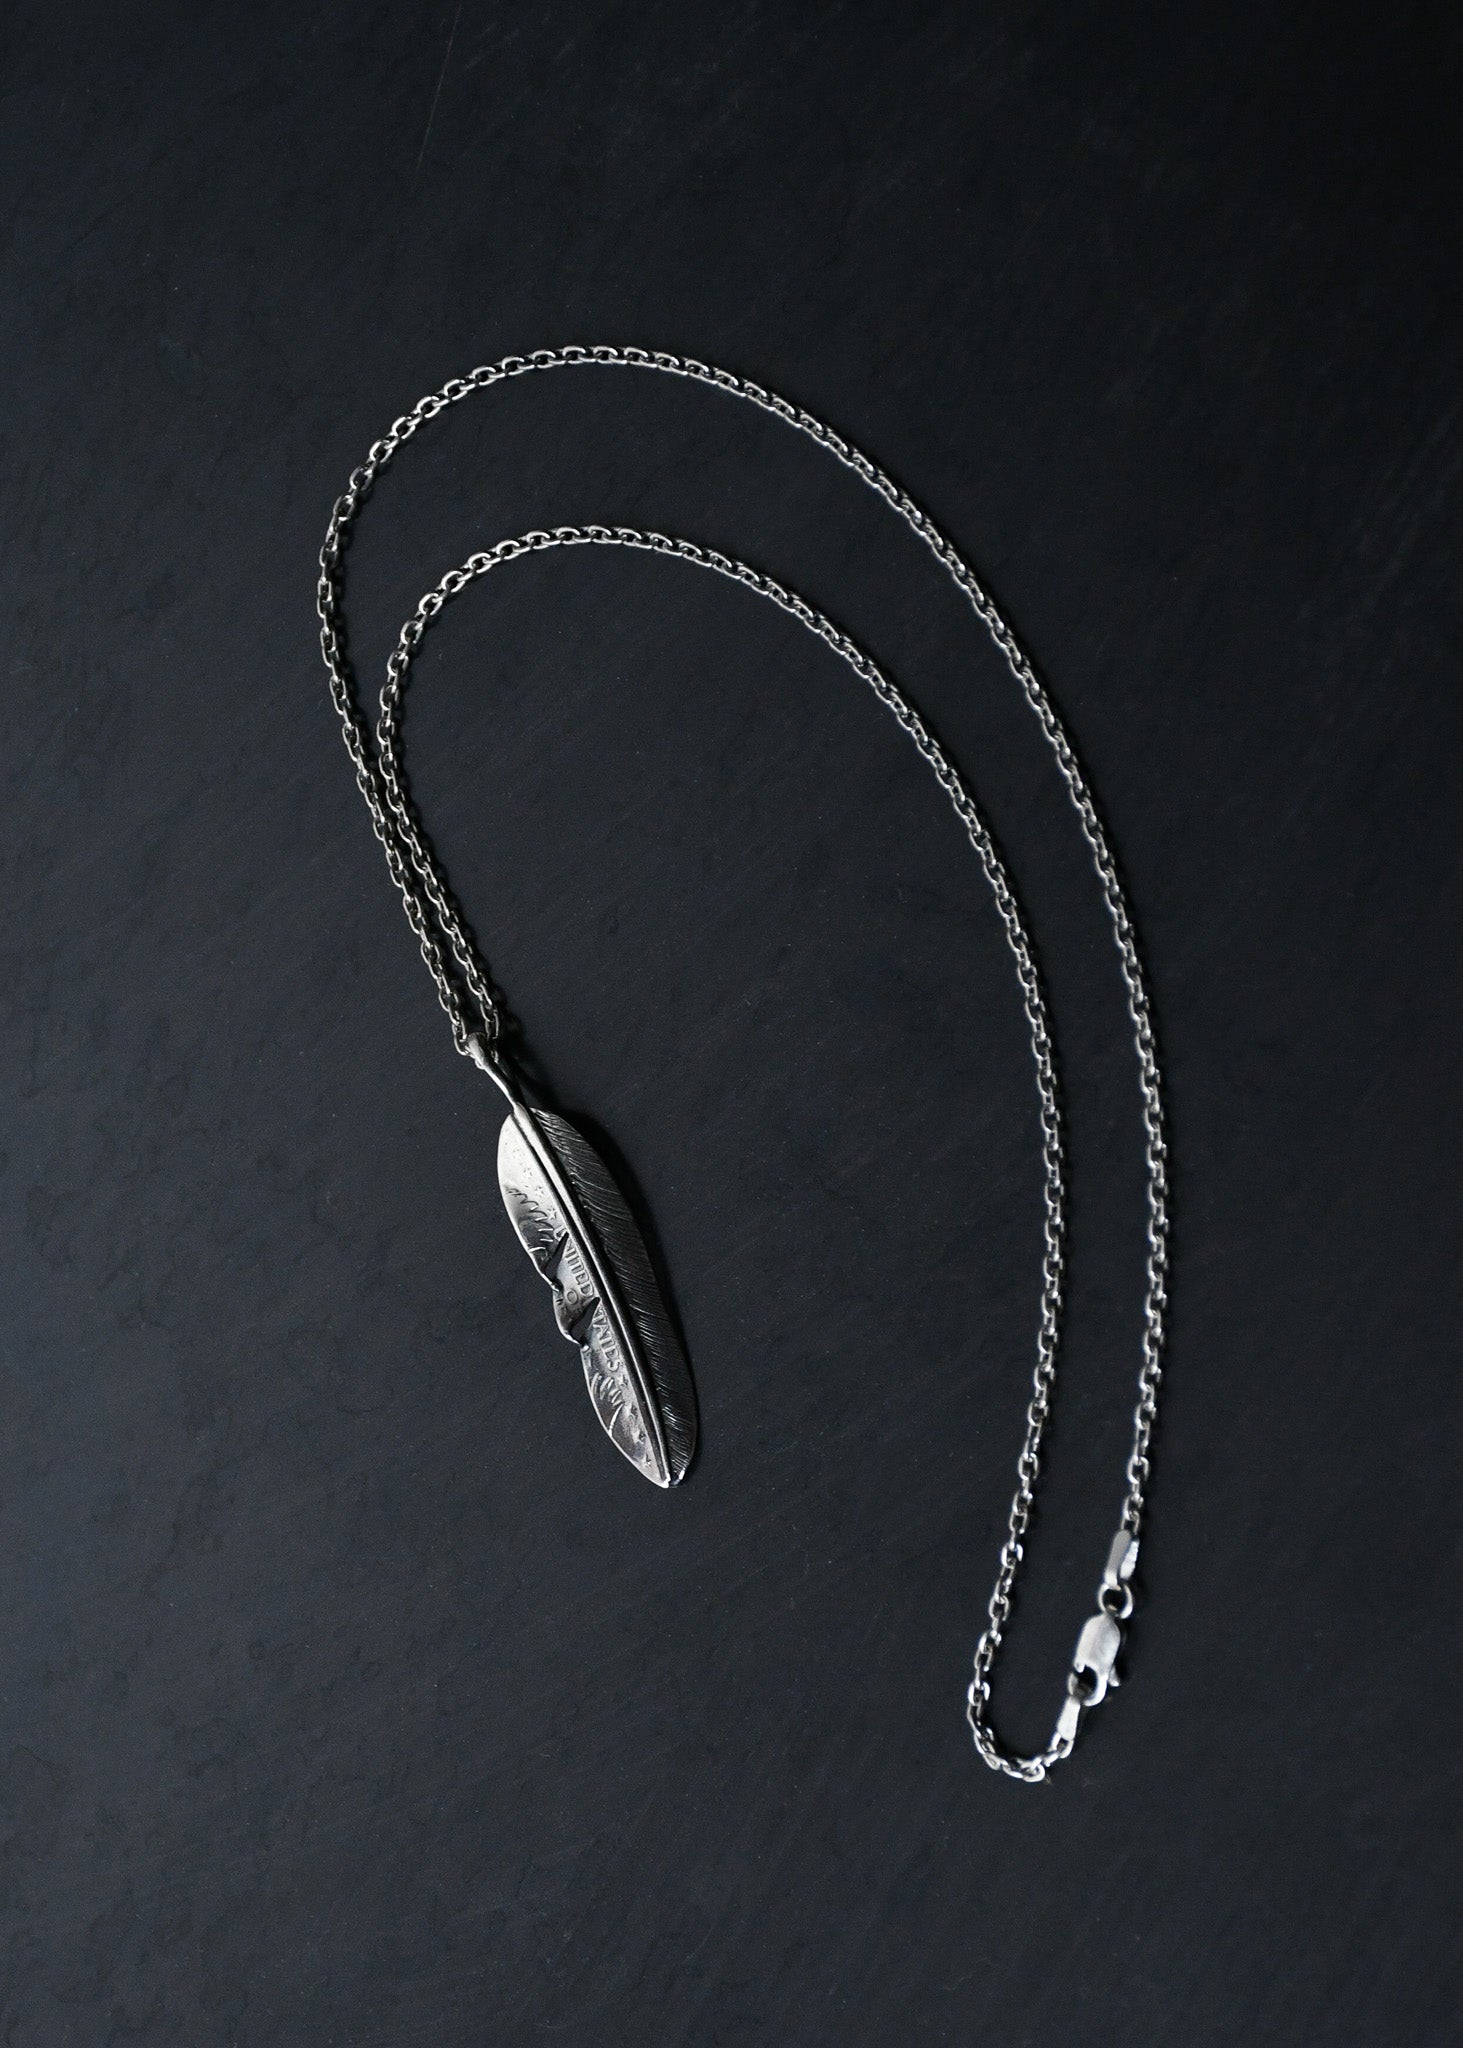 NORTH WORKS - NECKLACE - HALF FEATHER - N-639